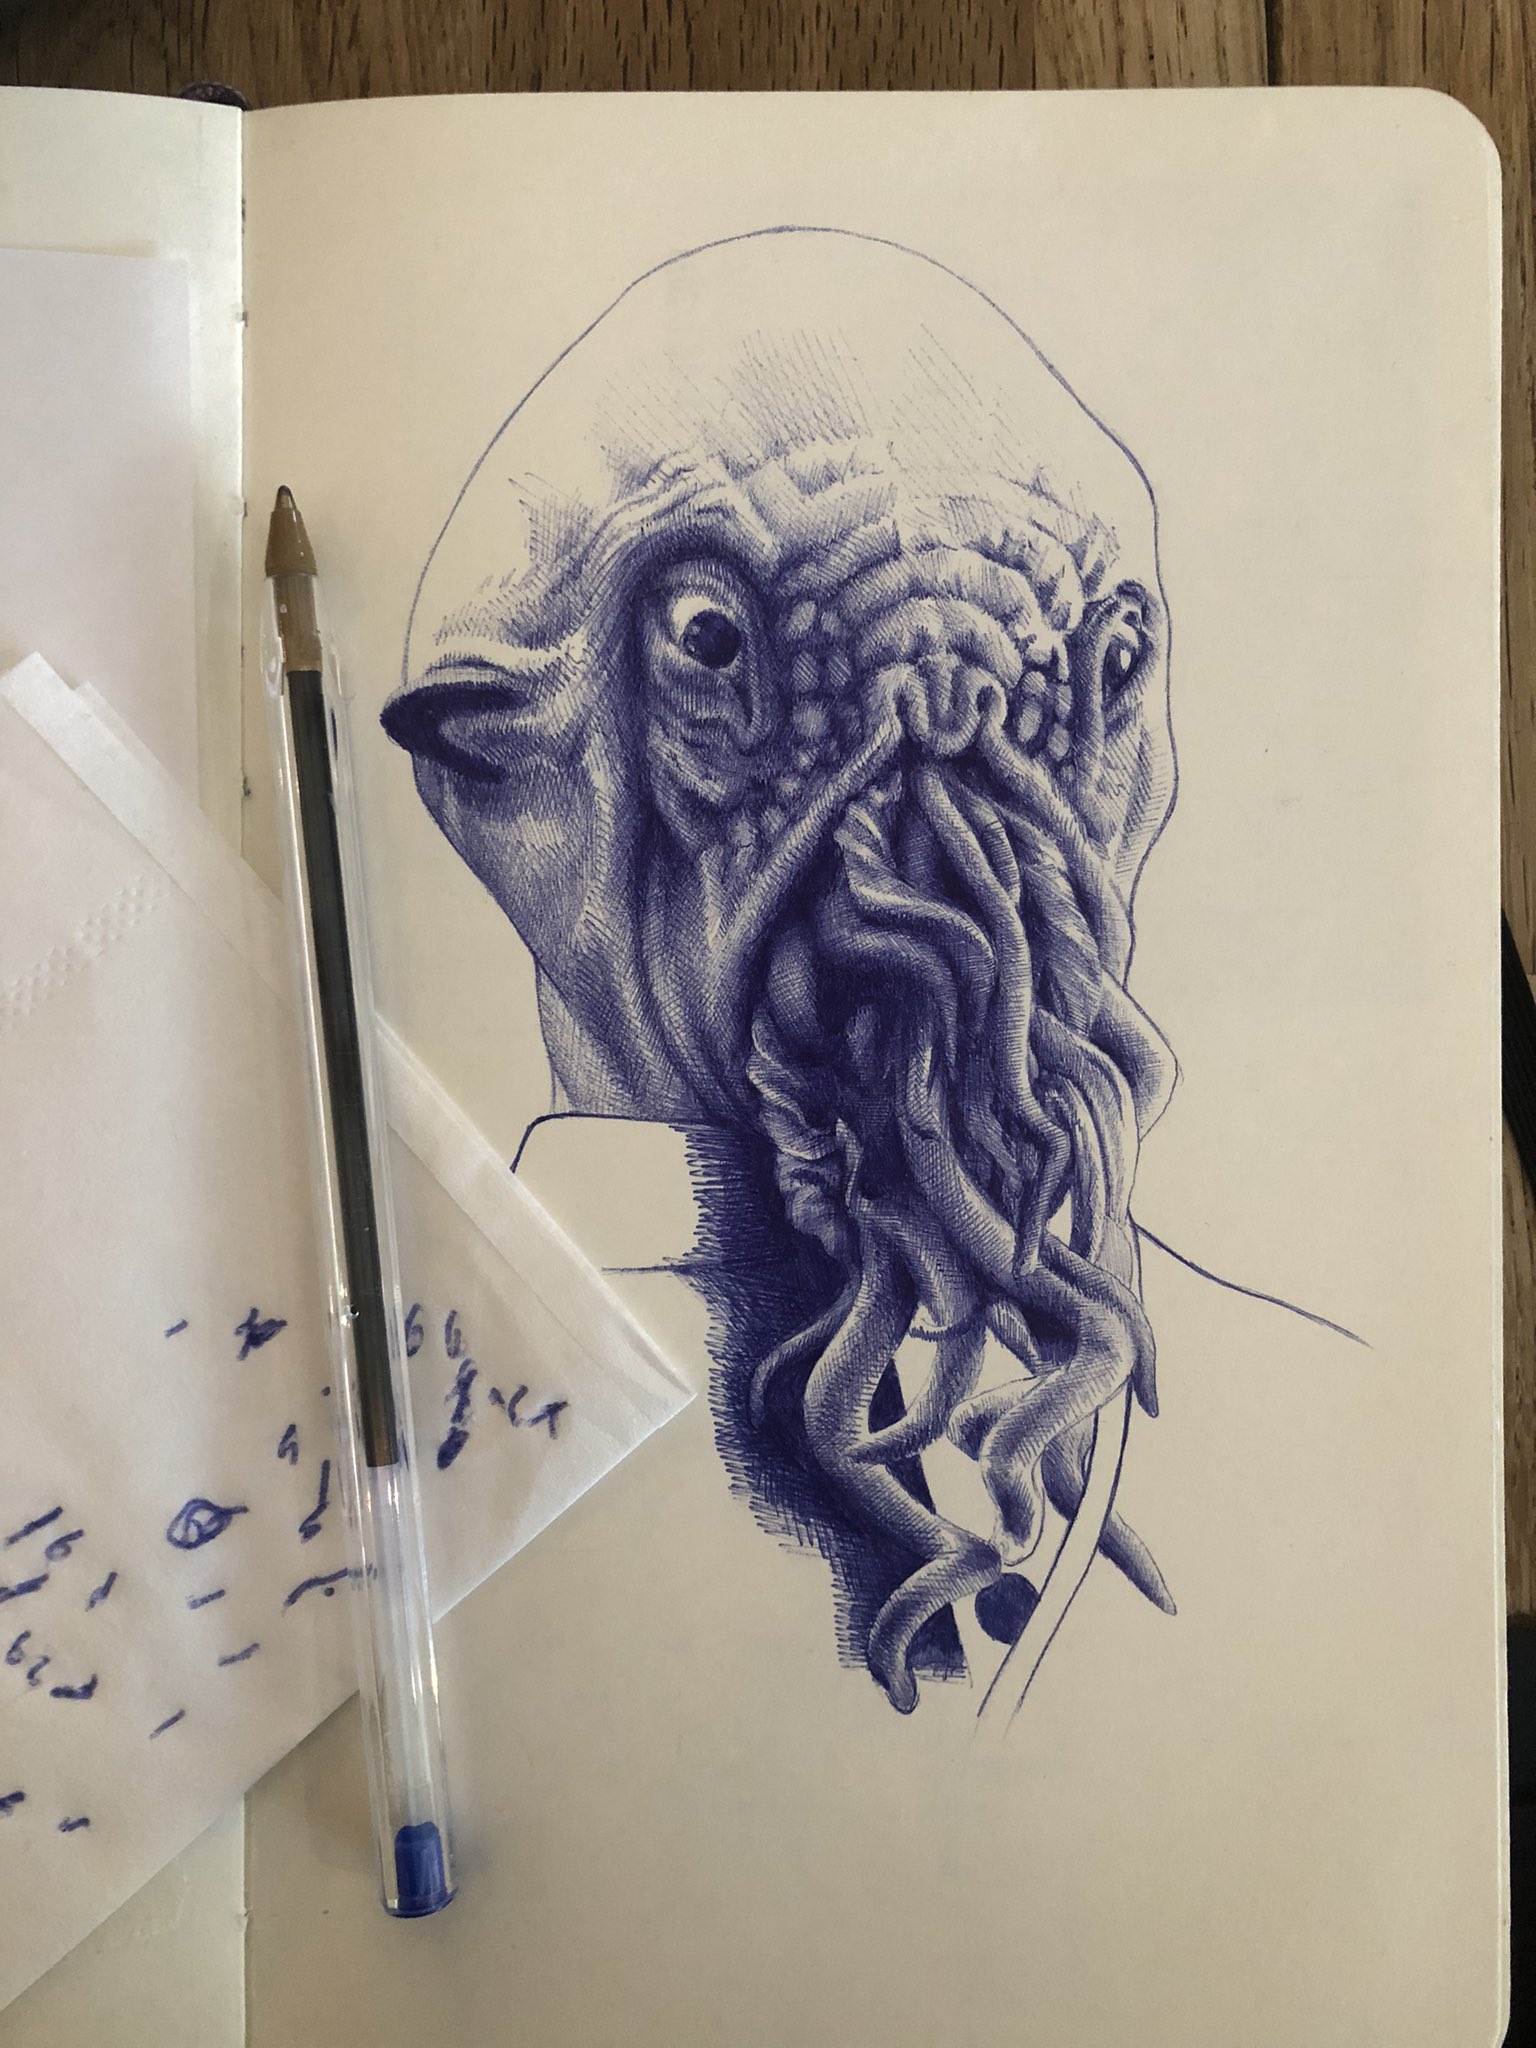 23 September: "Nothing odd about this excellent Ood! #FanArtFriday 🖊️: @BethanApple"[44]